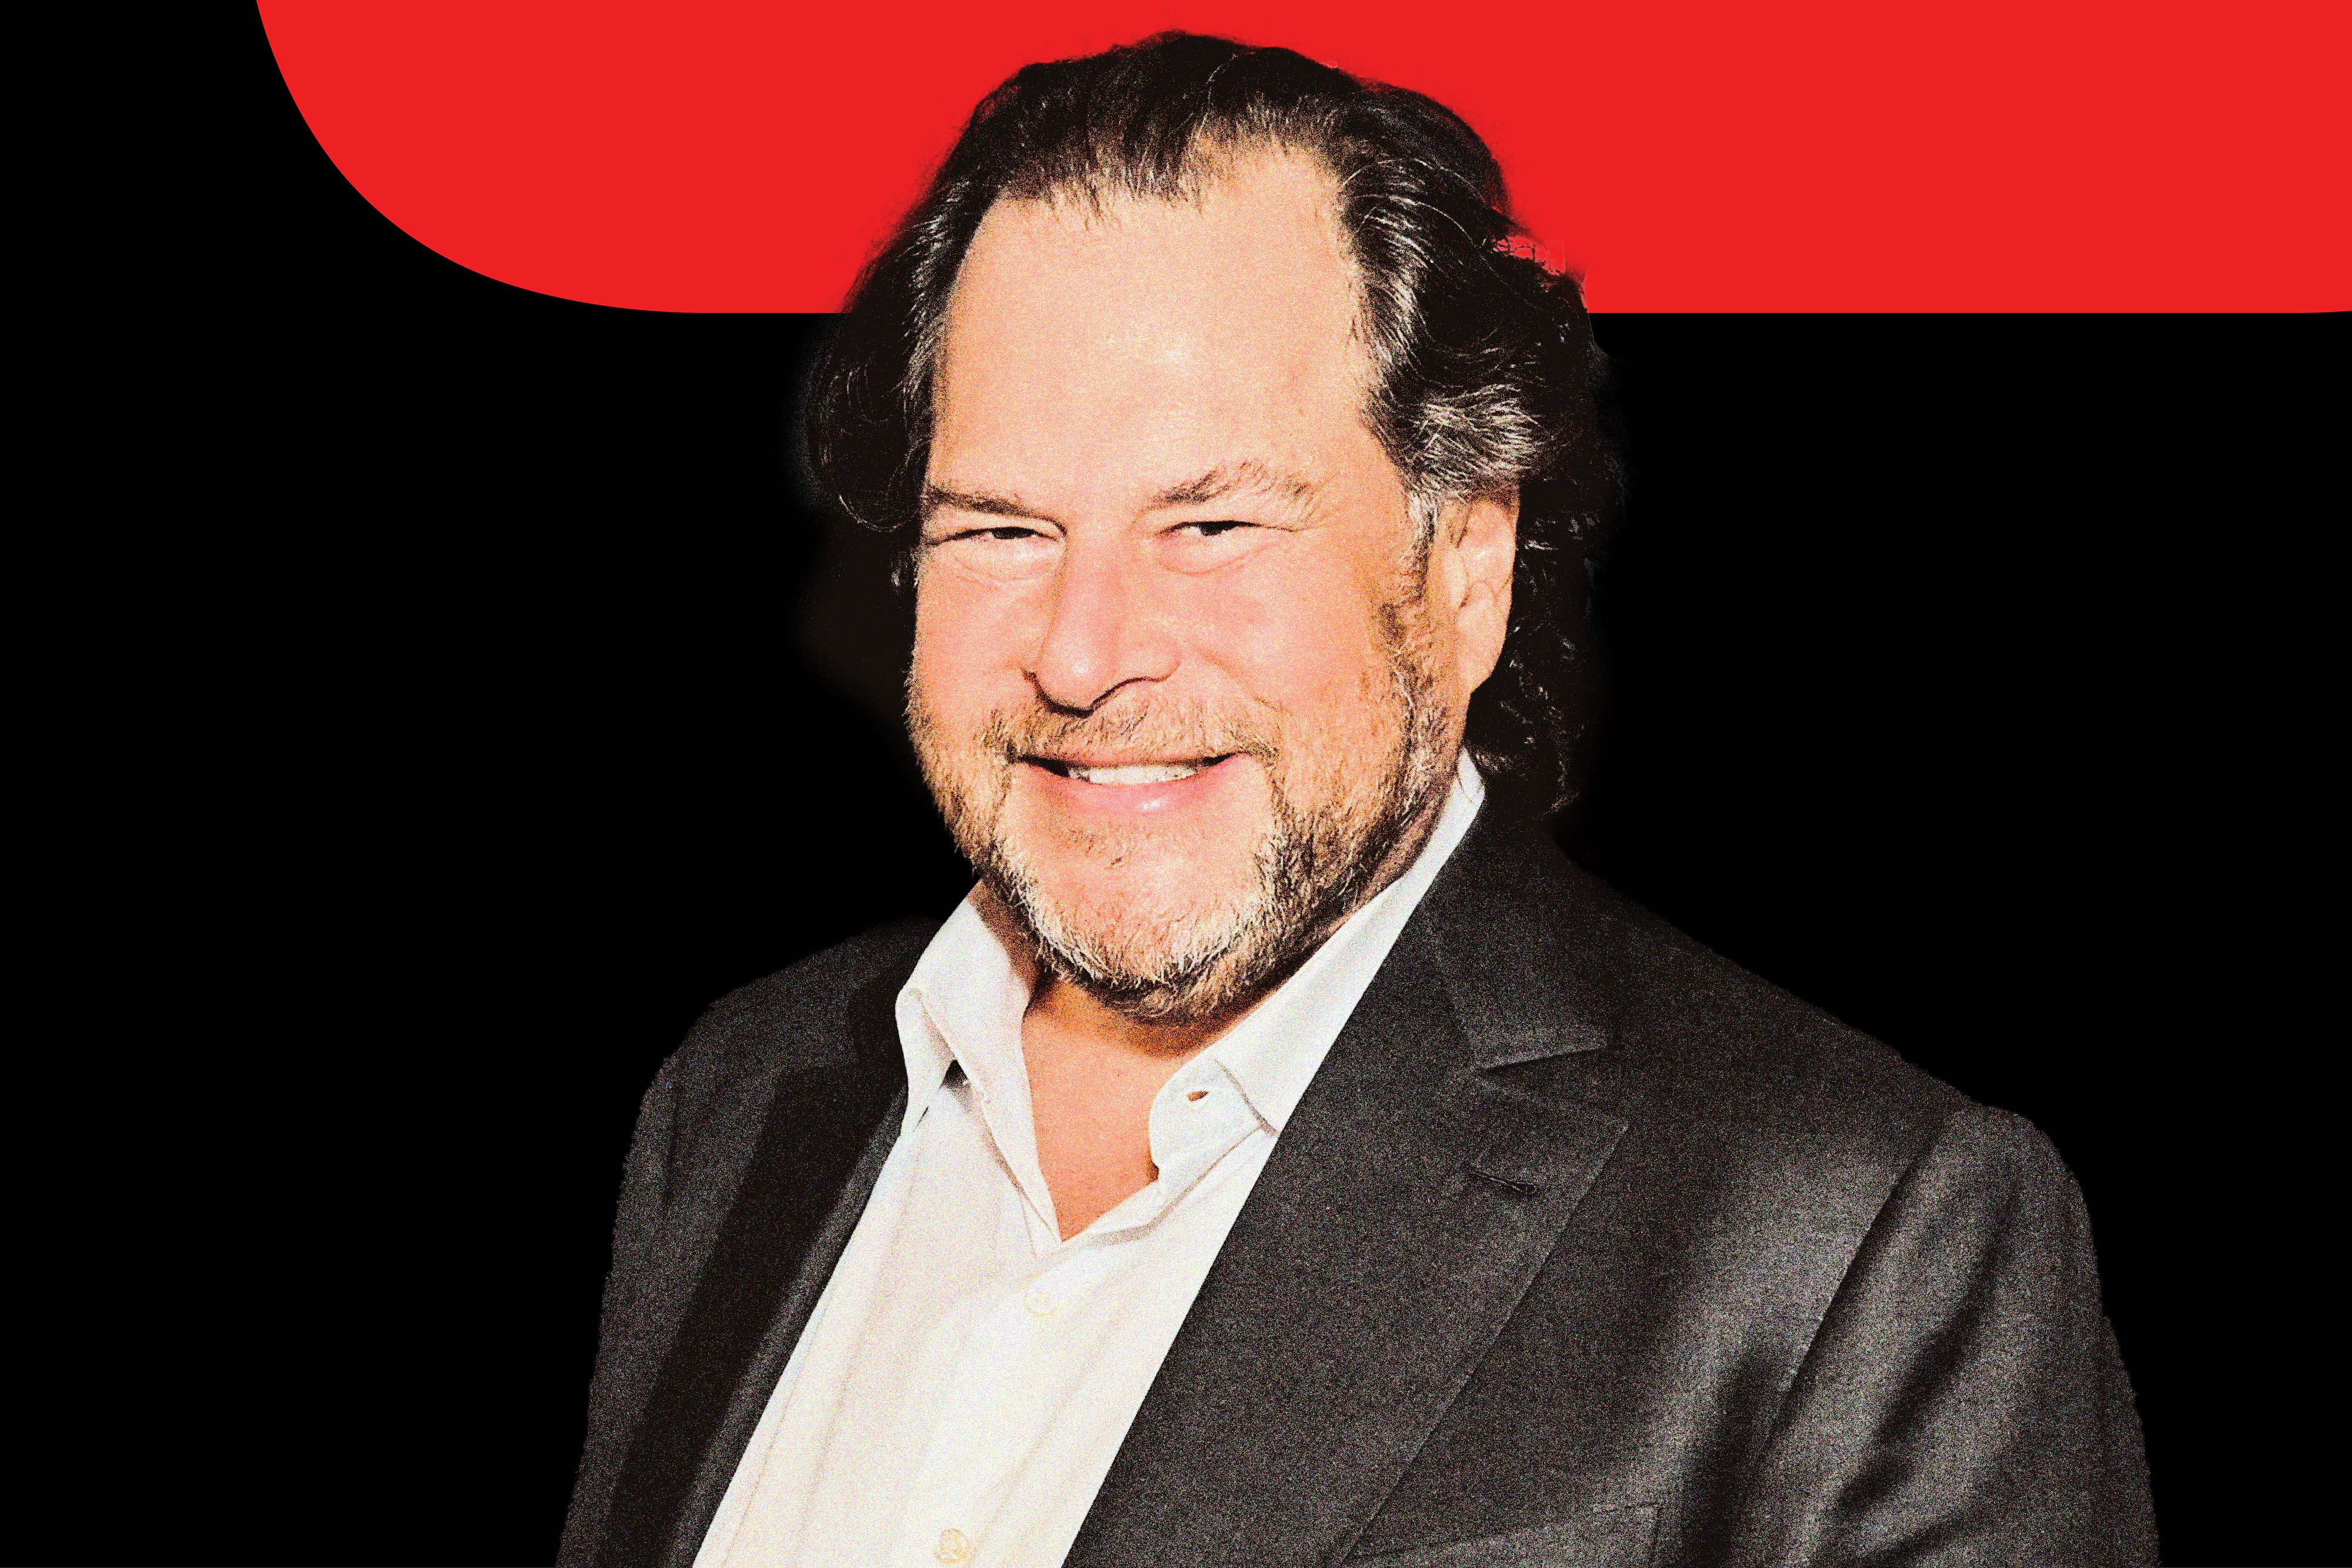 On With Kara Swisher': A Long Tough Talk With Marc Benioff